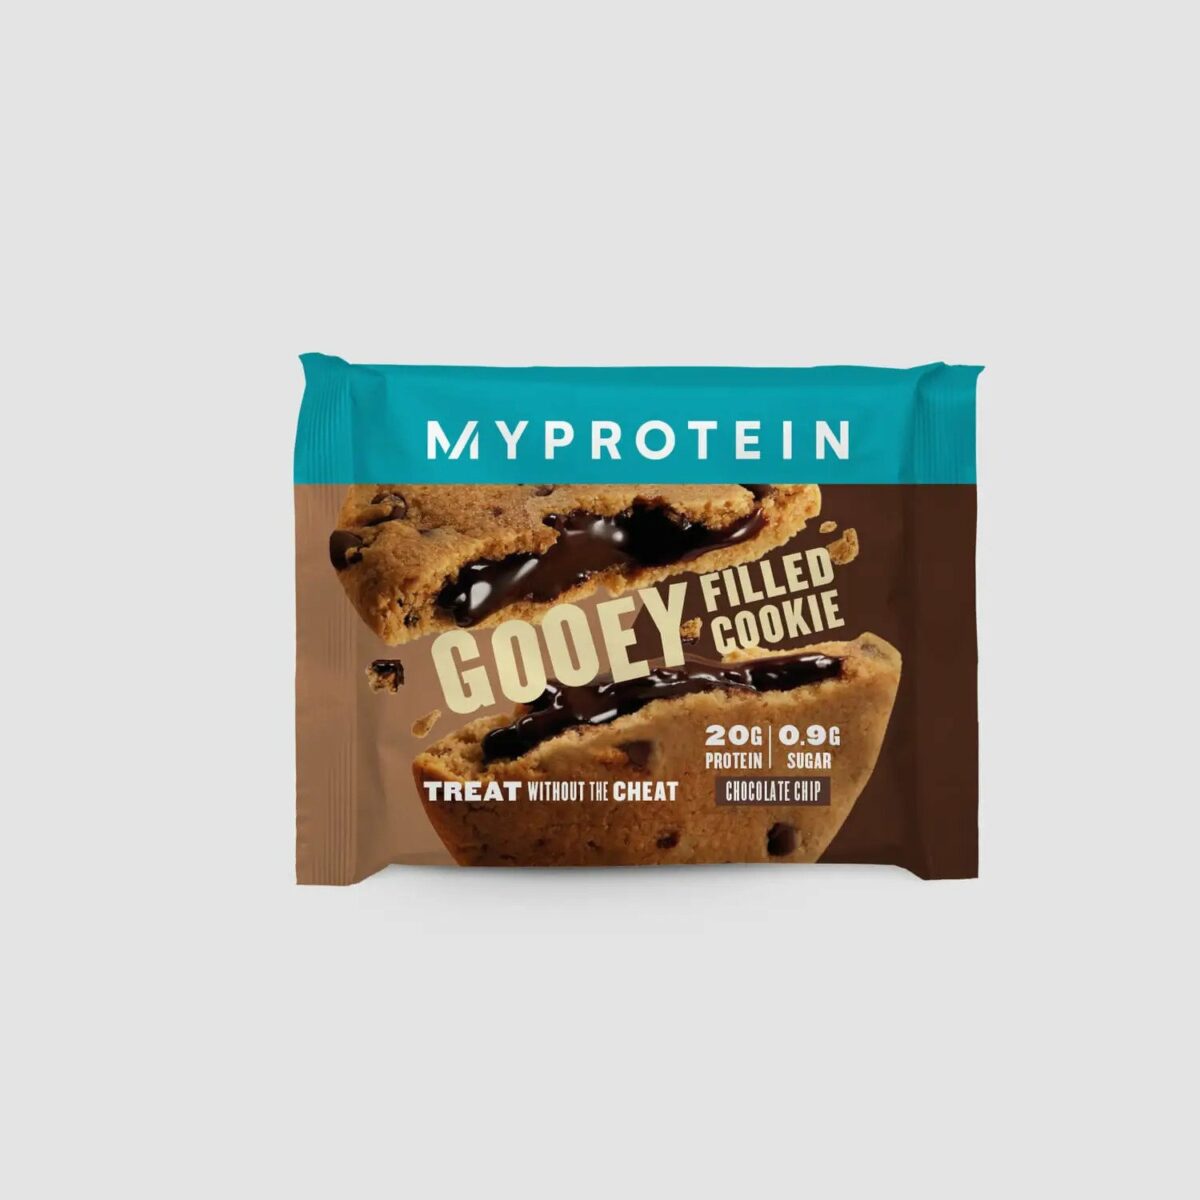 Filled protein cookie